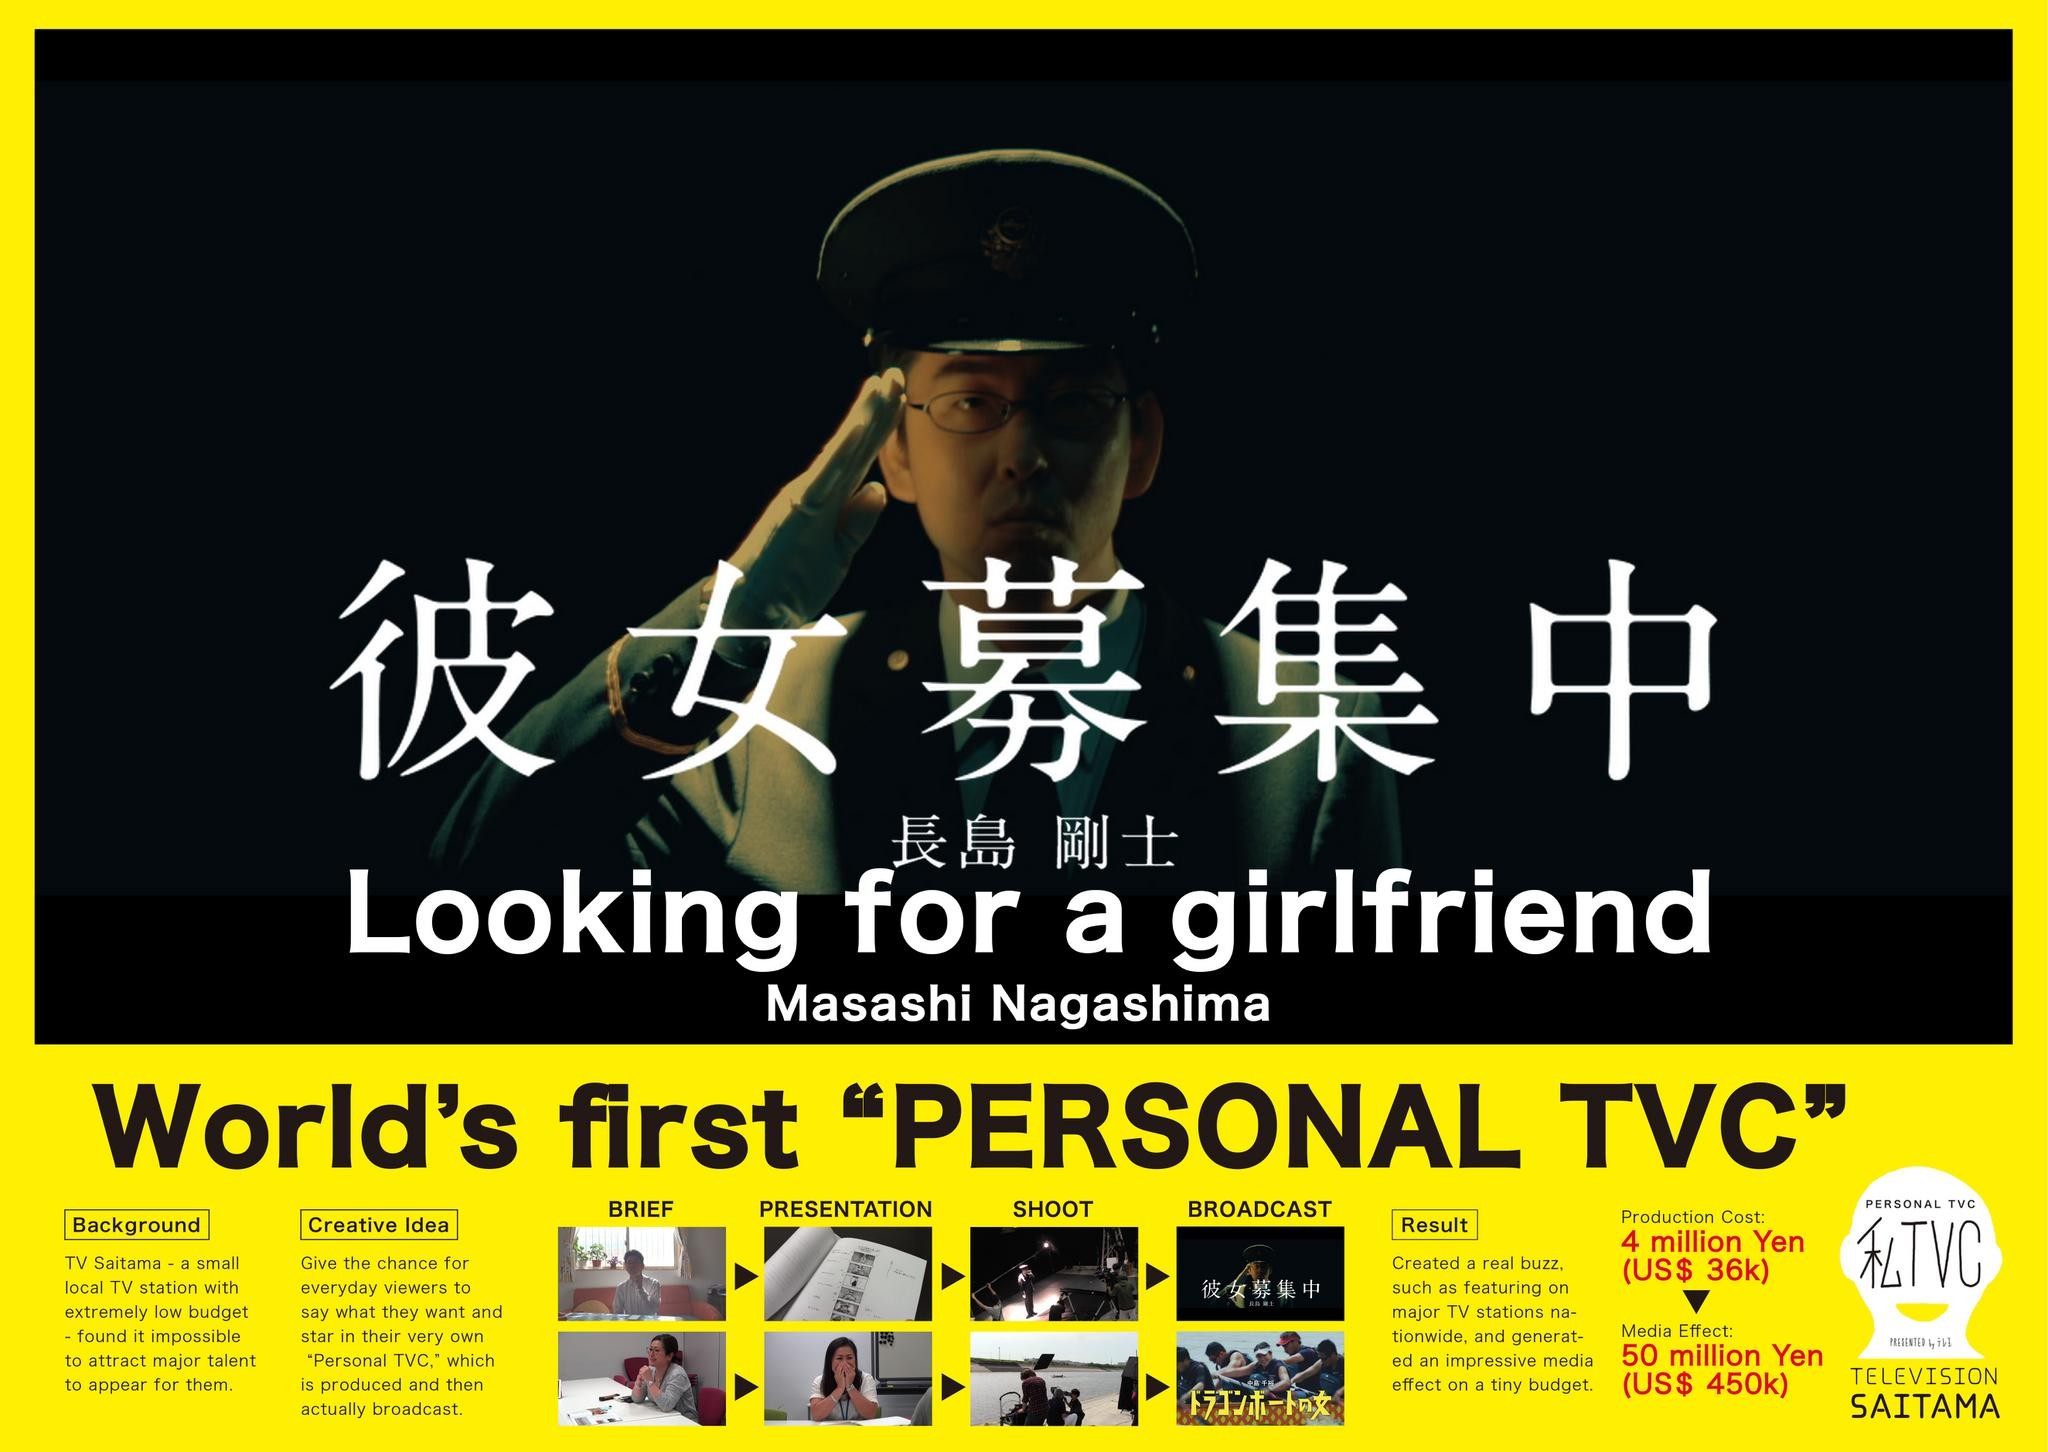 World's first "PERSONAL TVC"